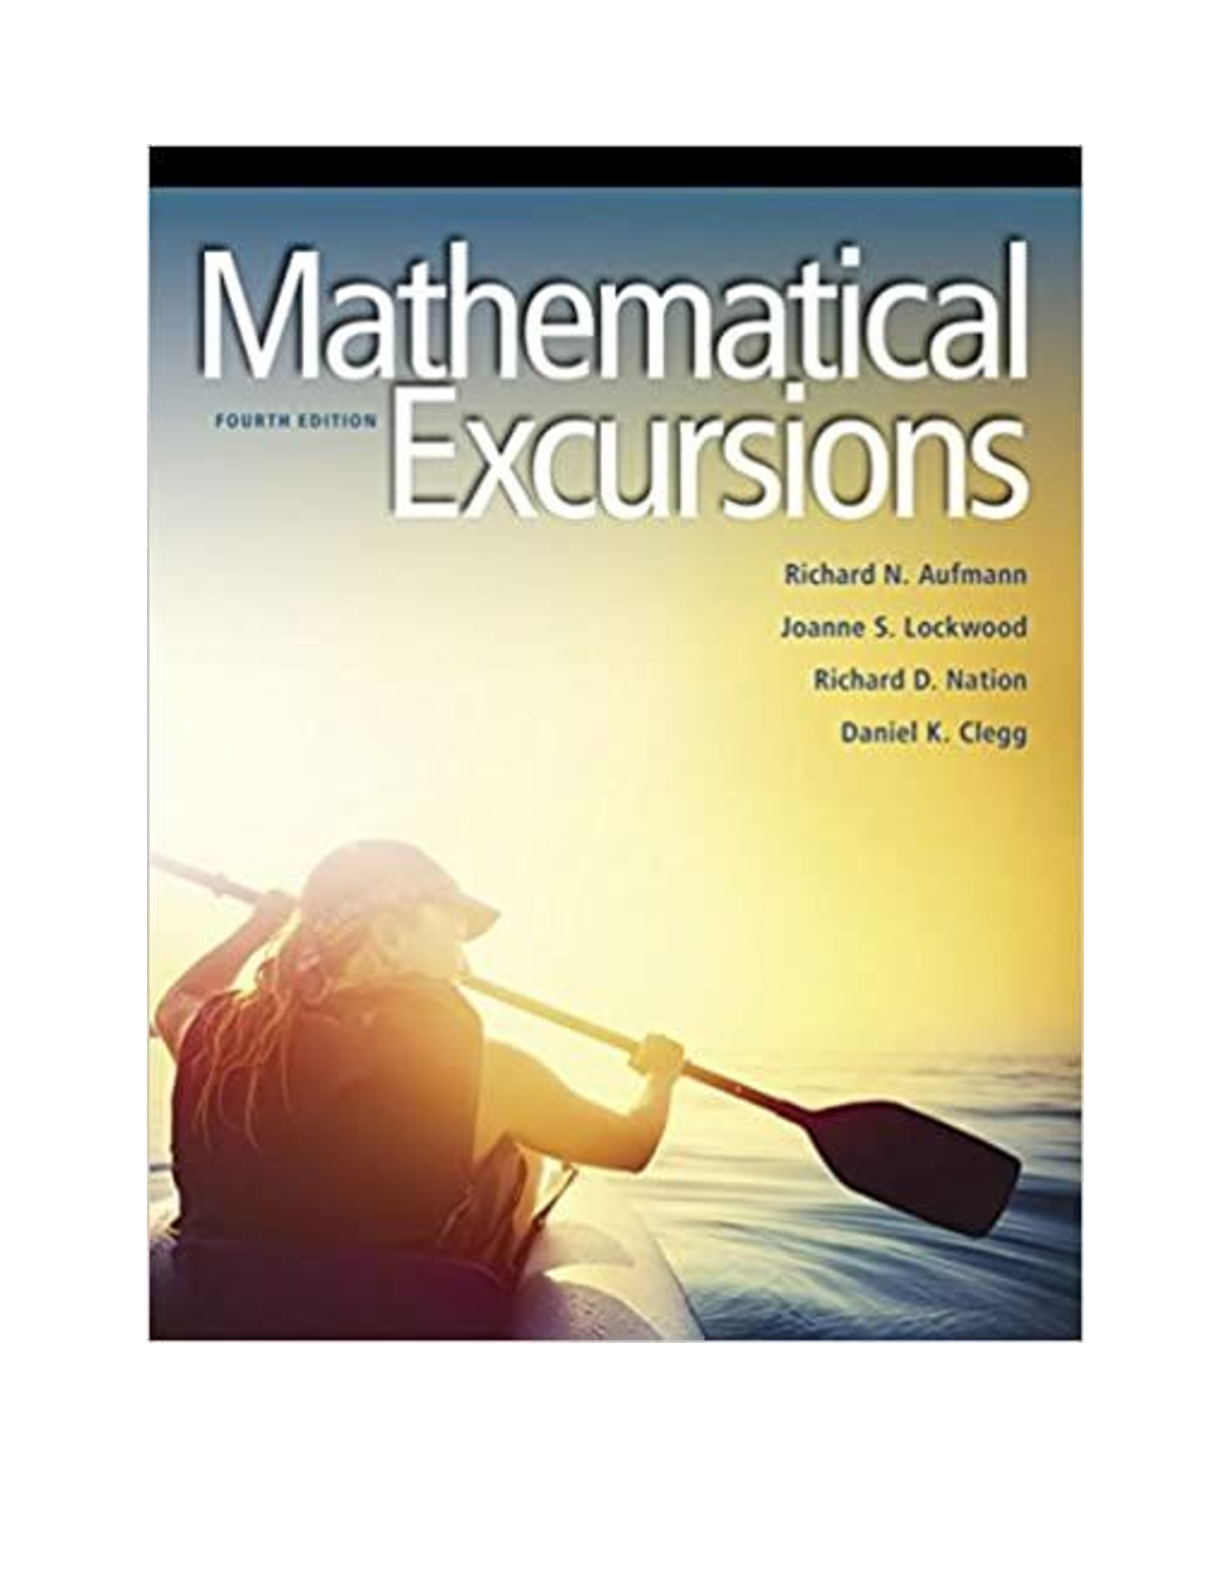 mathematical excursions 4th edition pdf free